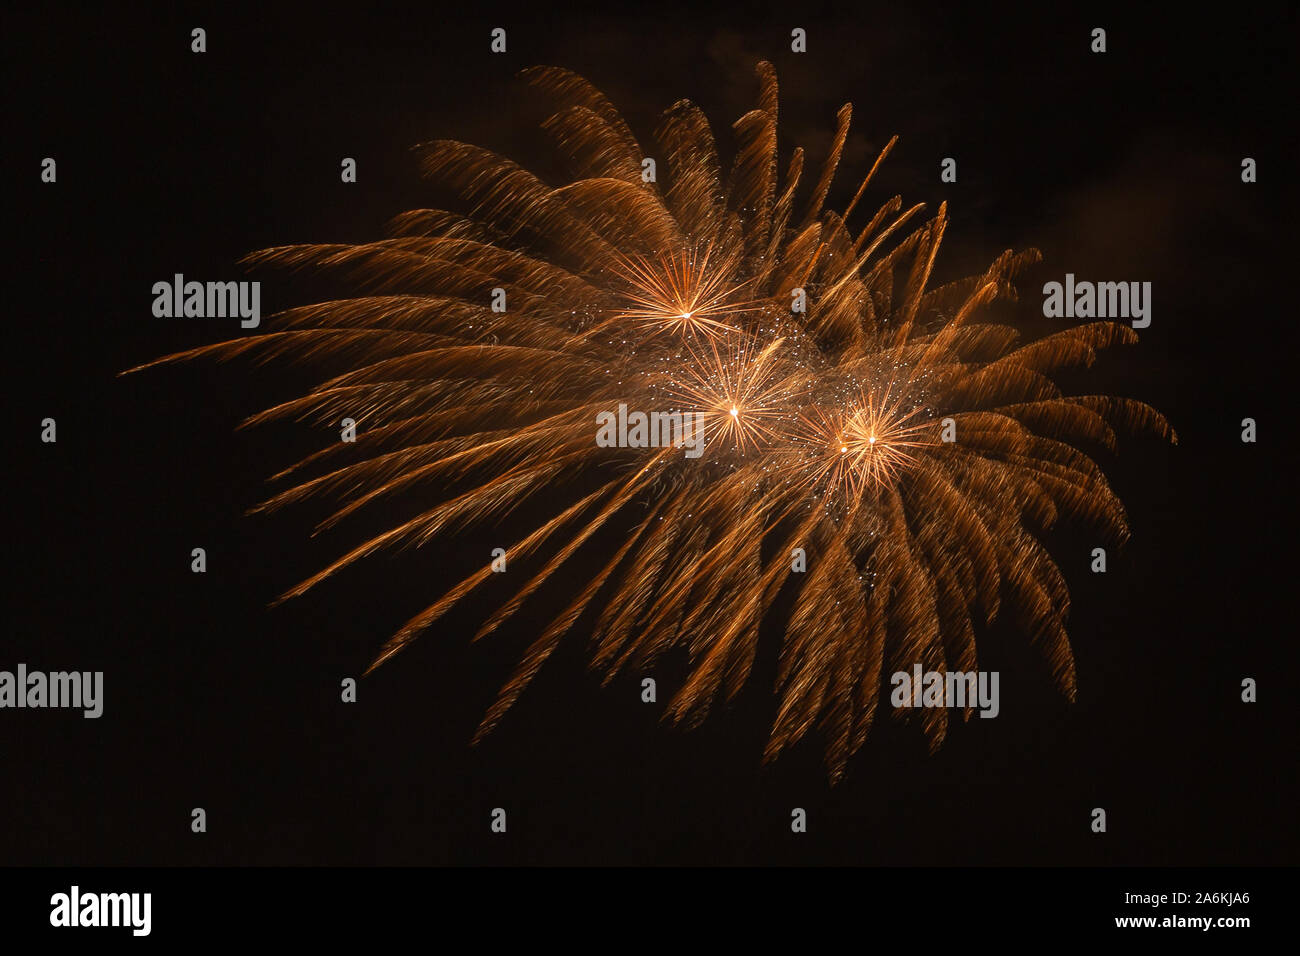 Awesome golden fireworks against the backdrop of the night sky Stock Photo